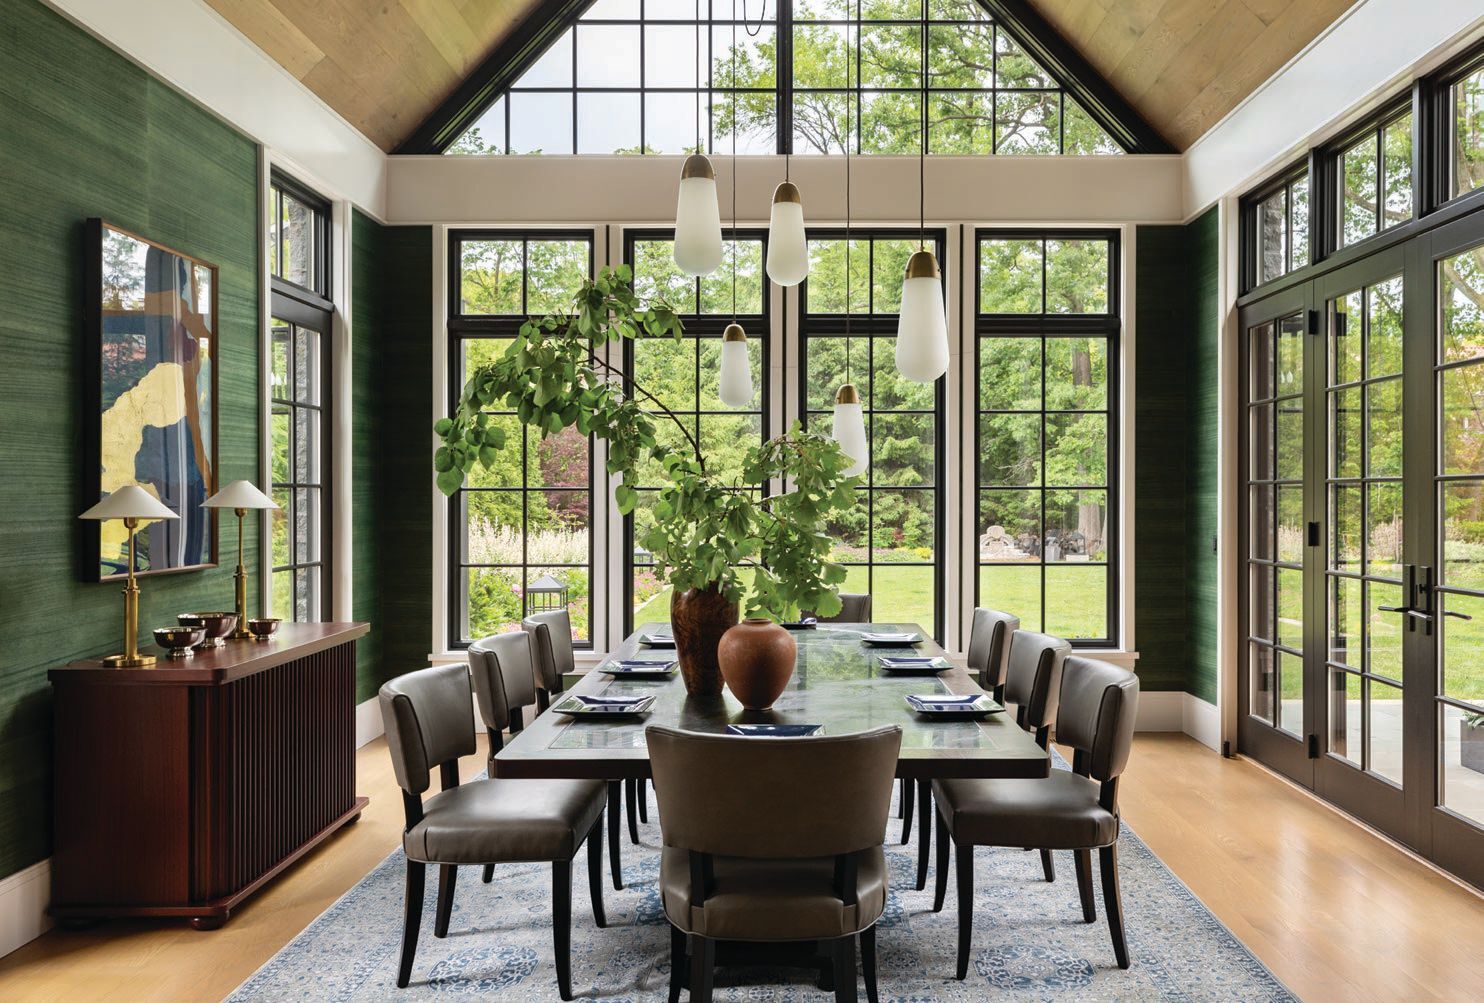 Walls of windows in the dining room let the outdoors in Photographed by Aimée Mazzenga